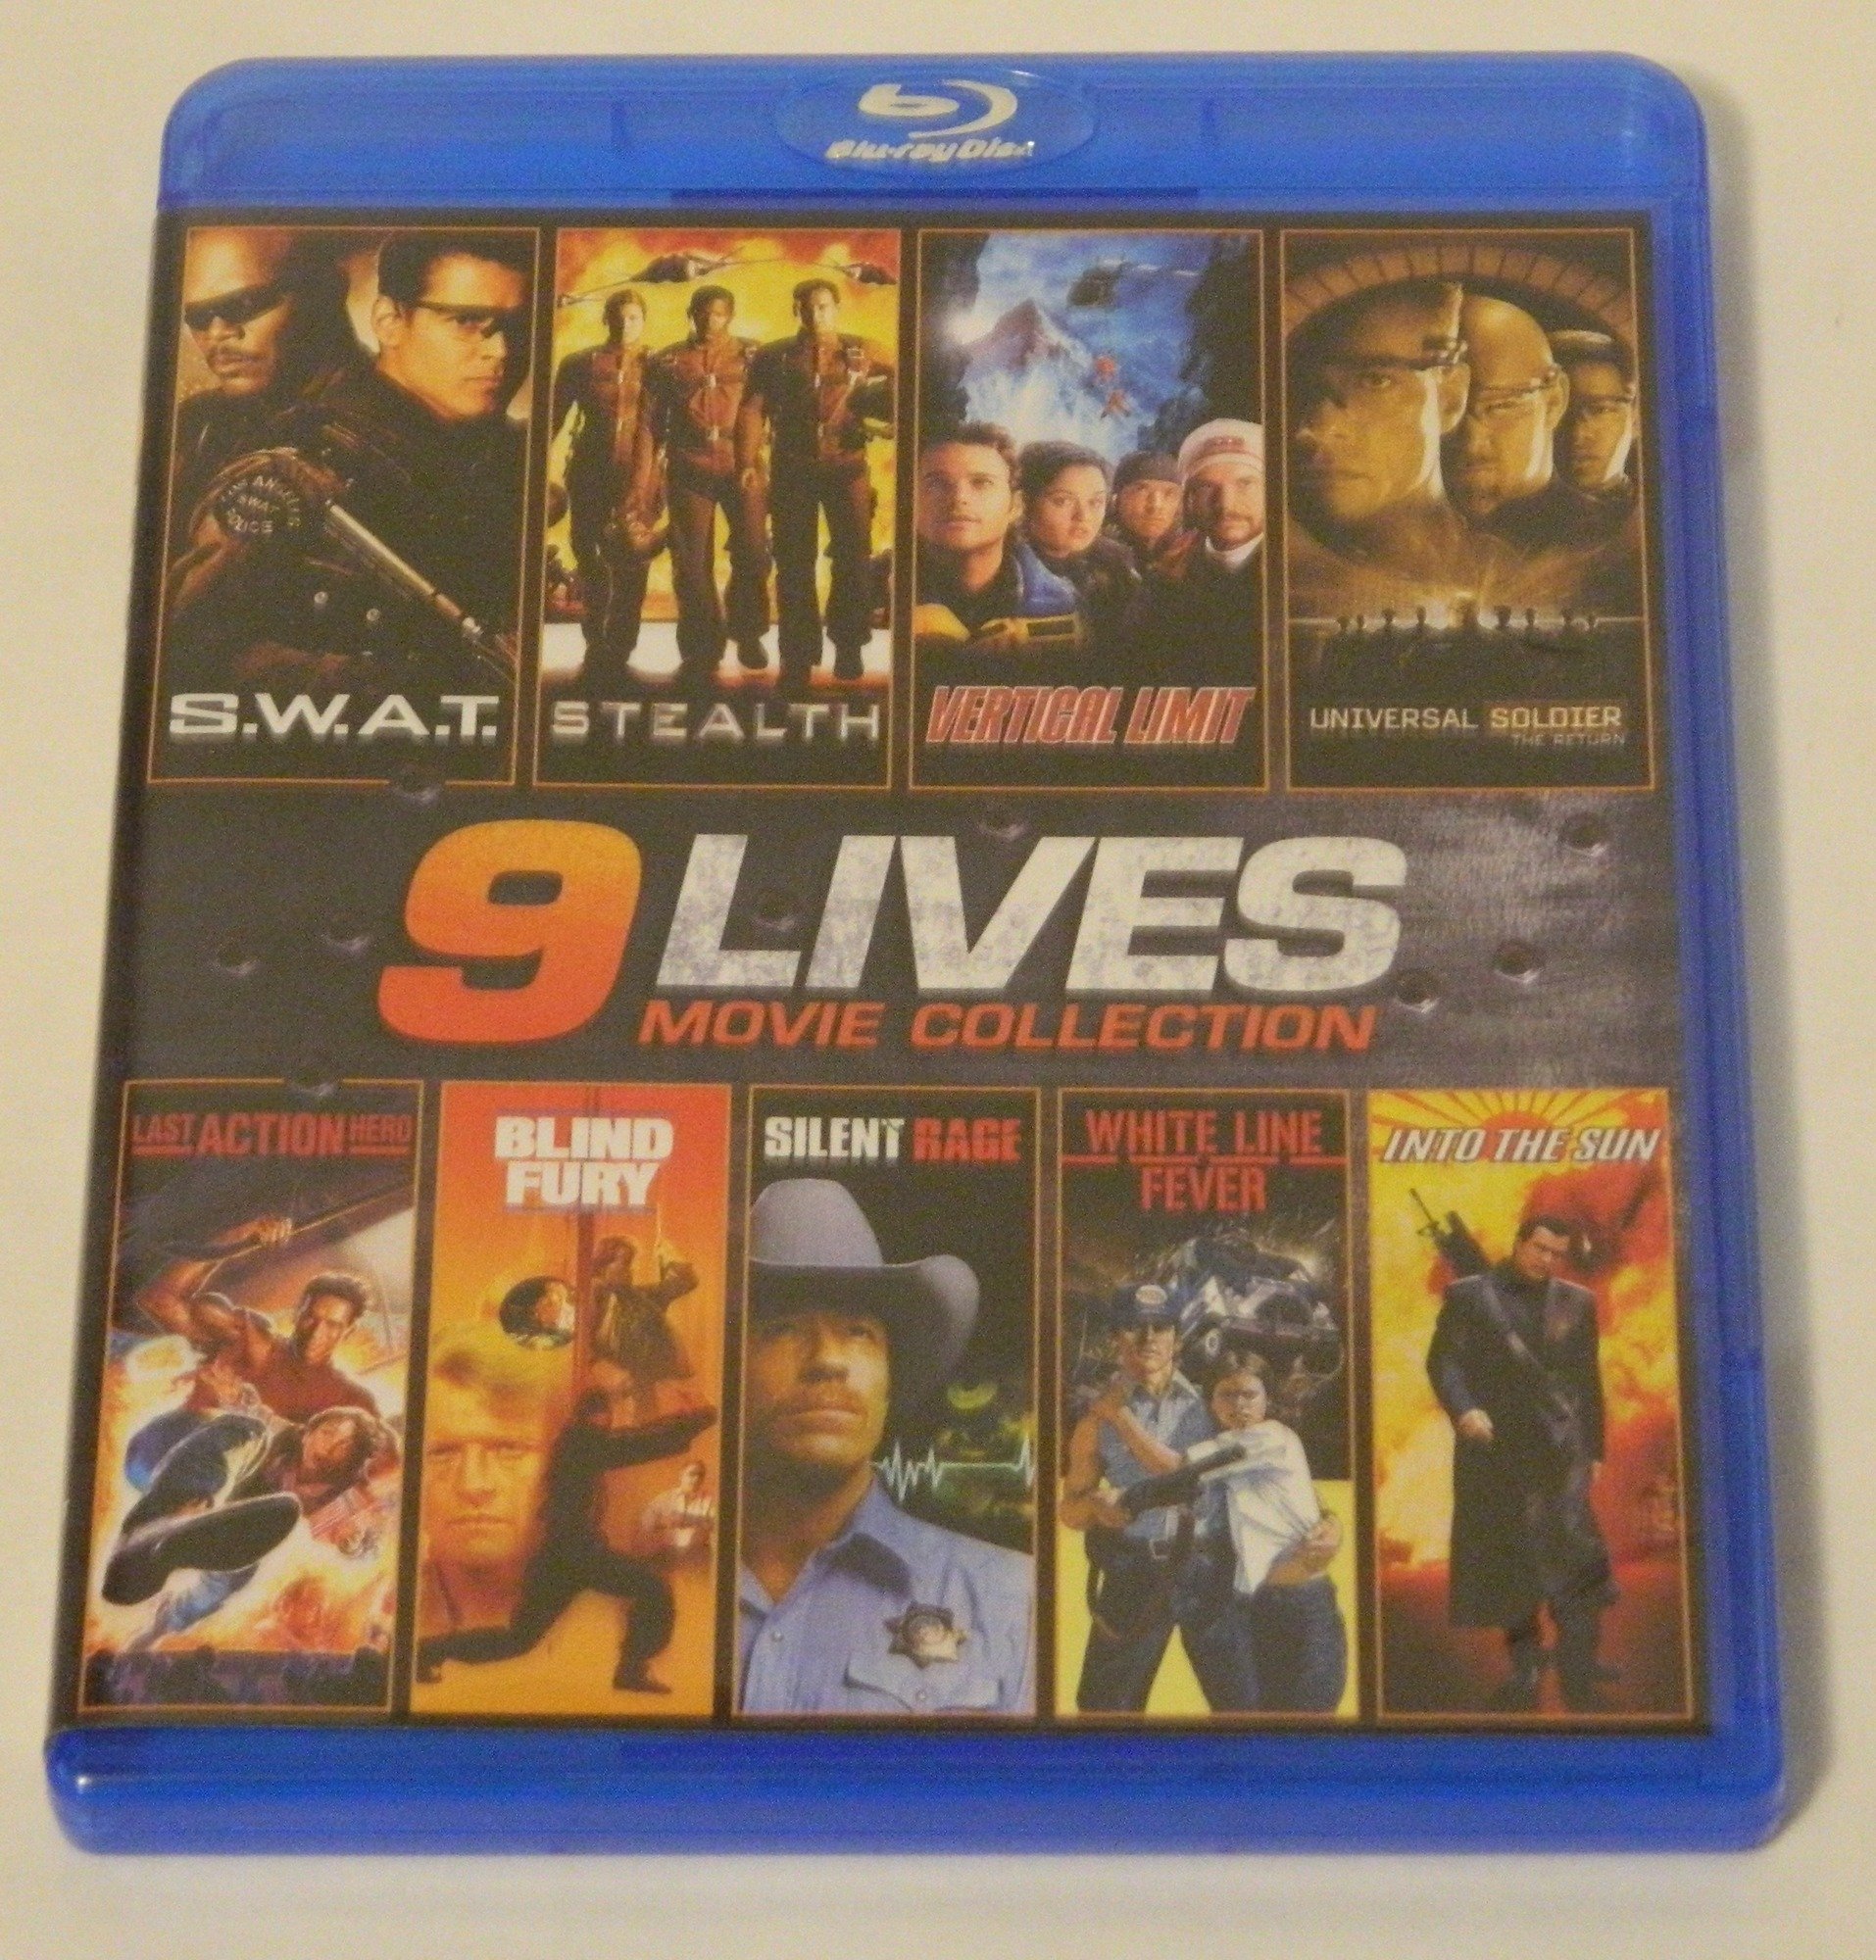 9 Lives Movie Collection Blu-ray Review